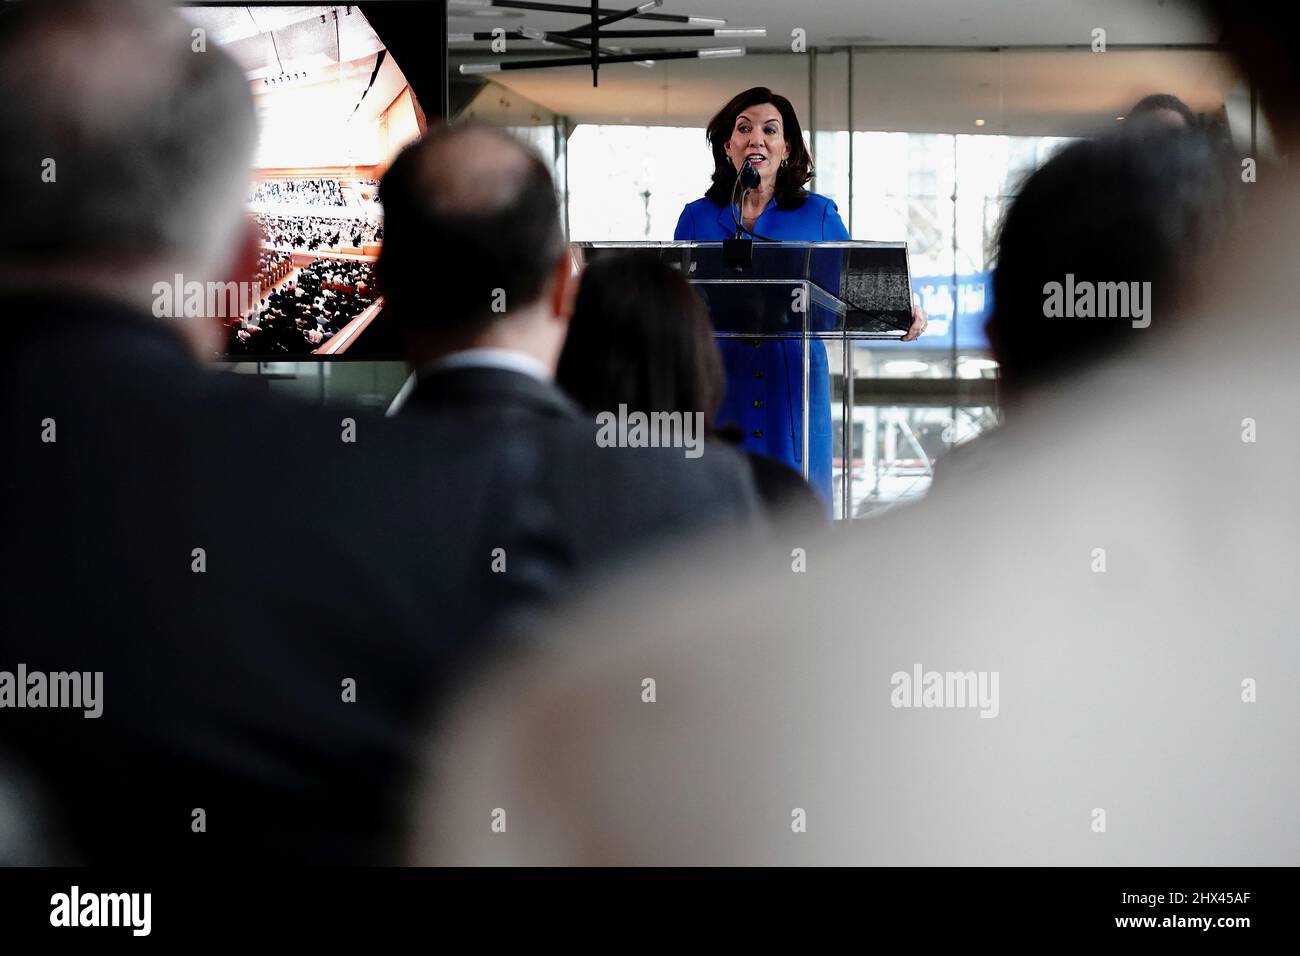 New York Governor Kathy Hochul speaks at a news conference about the newly renovated David Geffen Hall, in the Manhattan borough of New York City, New York, U.S., March 9, 2022.  REUTERS/Carlo Allegri Stock Photo